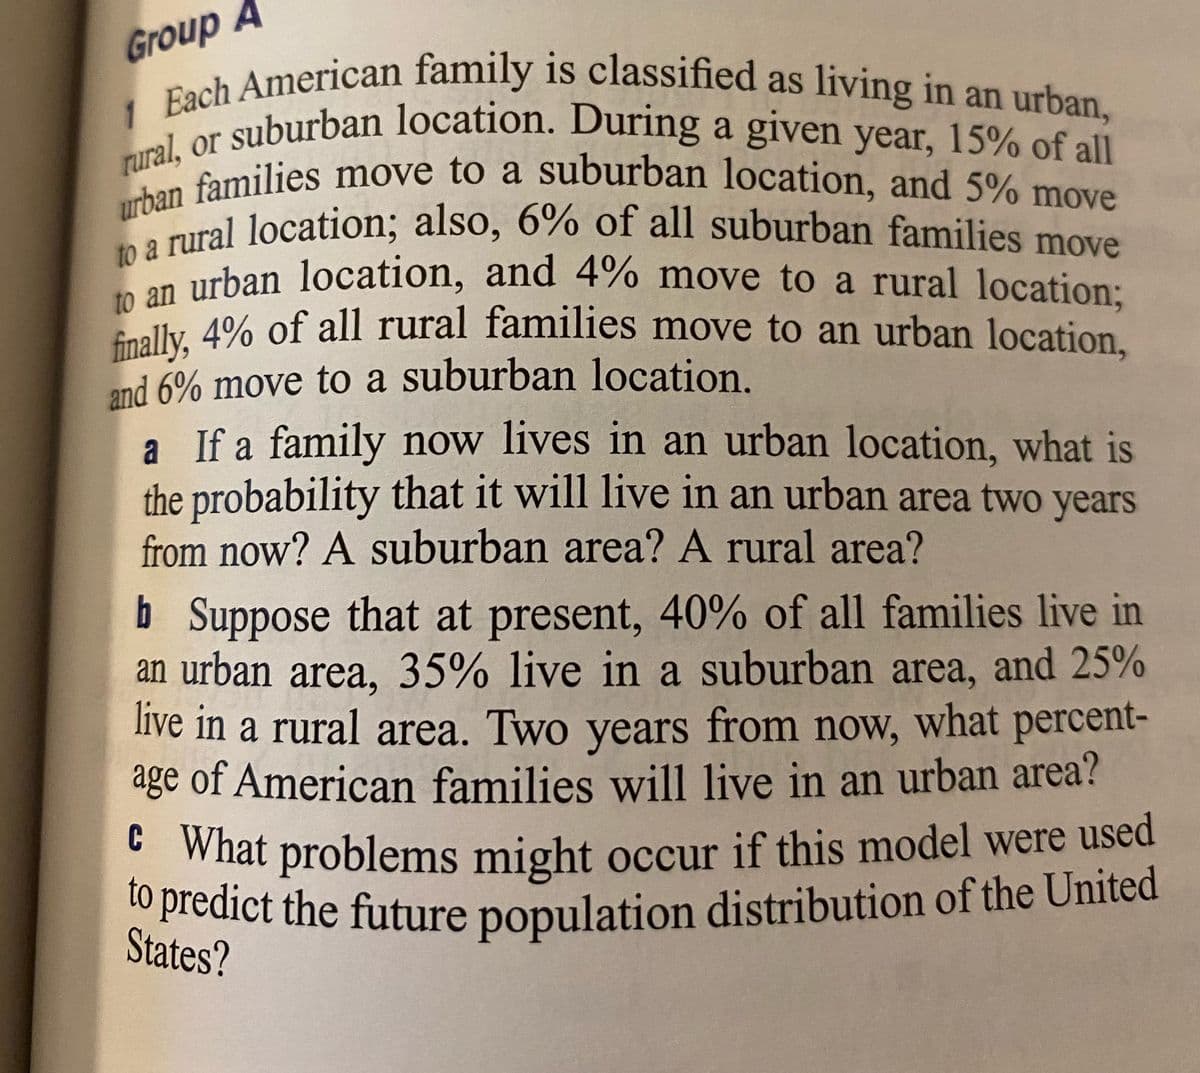 to predict the future population distribution of the United
h American family is classified as living in an urban
1 bacuburban location. During a given year, 15% of all
rurals families move to a suburban location, and 5% move
e pral location; also, 6% of all suburban families move
on urban location, and 4% move to a rural location:
dly 4% of all rural families move to an urban location,
rural, or suburban location. During a given year, 15% of all
to a rural location; also, 6% of all suburban families move
finally, 4% of all rural families move to an urban location,
urban families move to a suburban location, and 5% move
Group A
and 6% move to a suburban location.
a If a family now lives in an urban location, what is
the probability that it will live in an urban area two years
from now? A suburban area? A rural area?
b Suppose that at present, 40% of all families live in
an urban area, 35% live in a suburban area, and 25%
live in a rural area. Two years from now, what percent-
age of American families will live in an urban area?
b
• What problems might occur if this model were used
o predict the future population distribution of the United
States?
